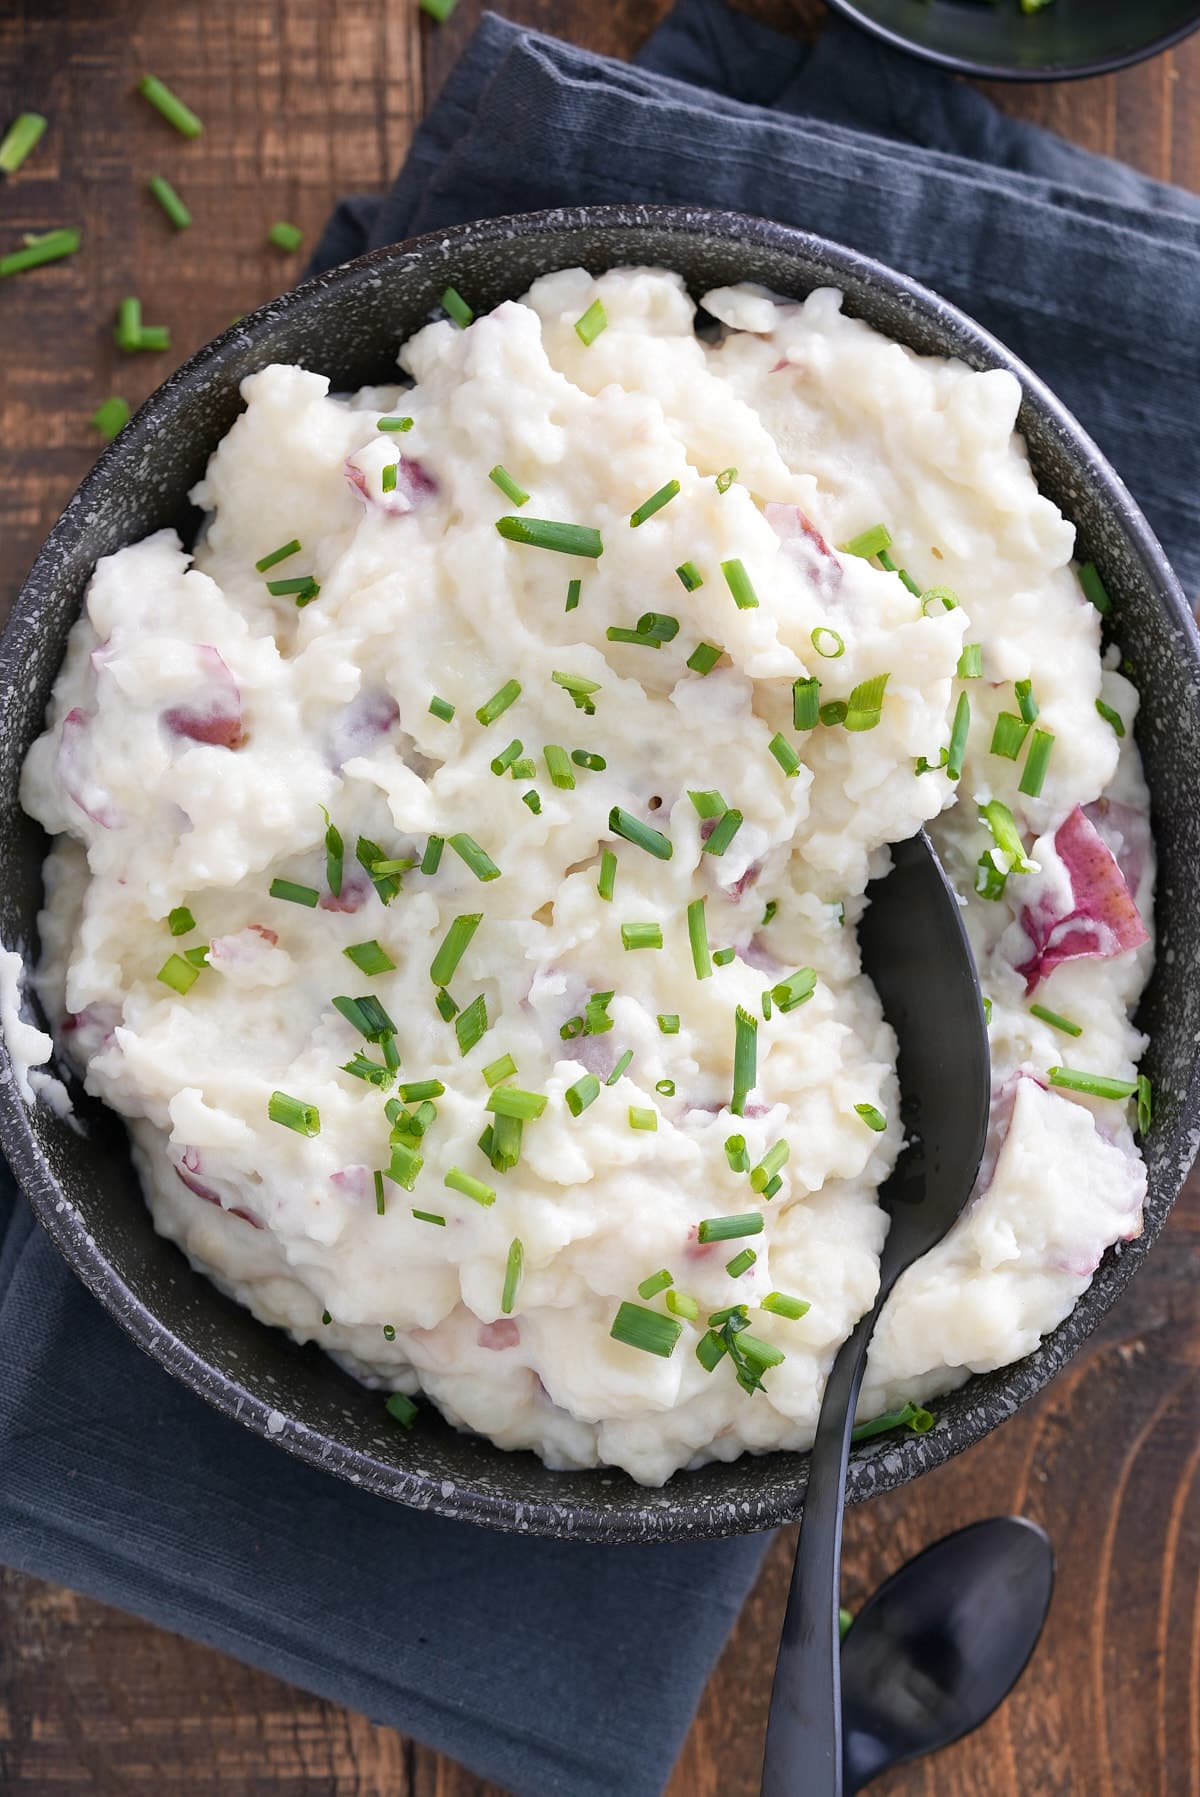 A bowl of mashed red skinned potatoes garnished with finely chopped chives.